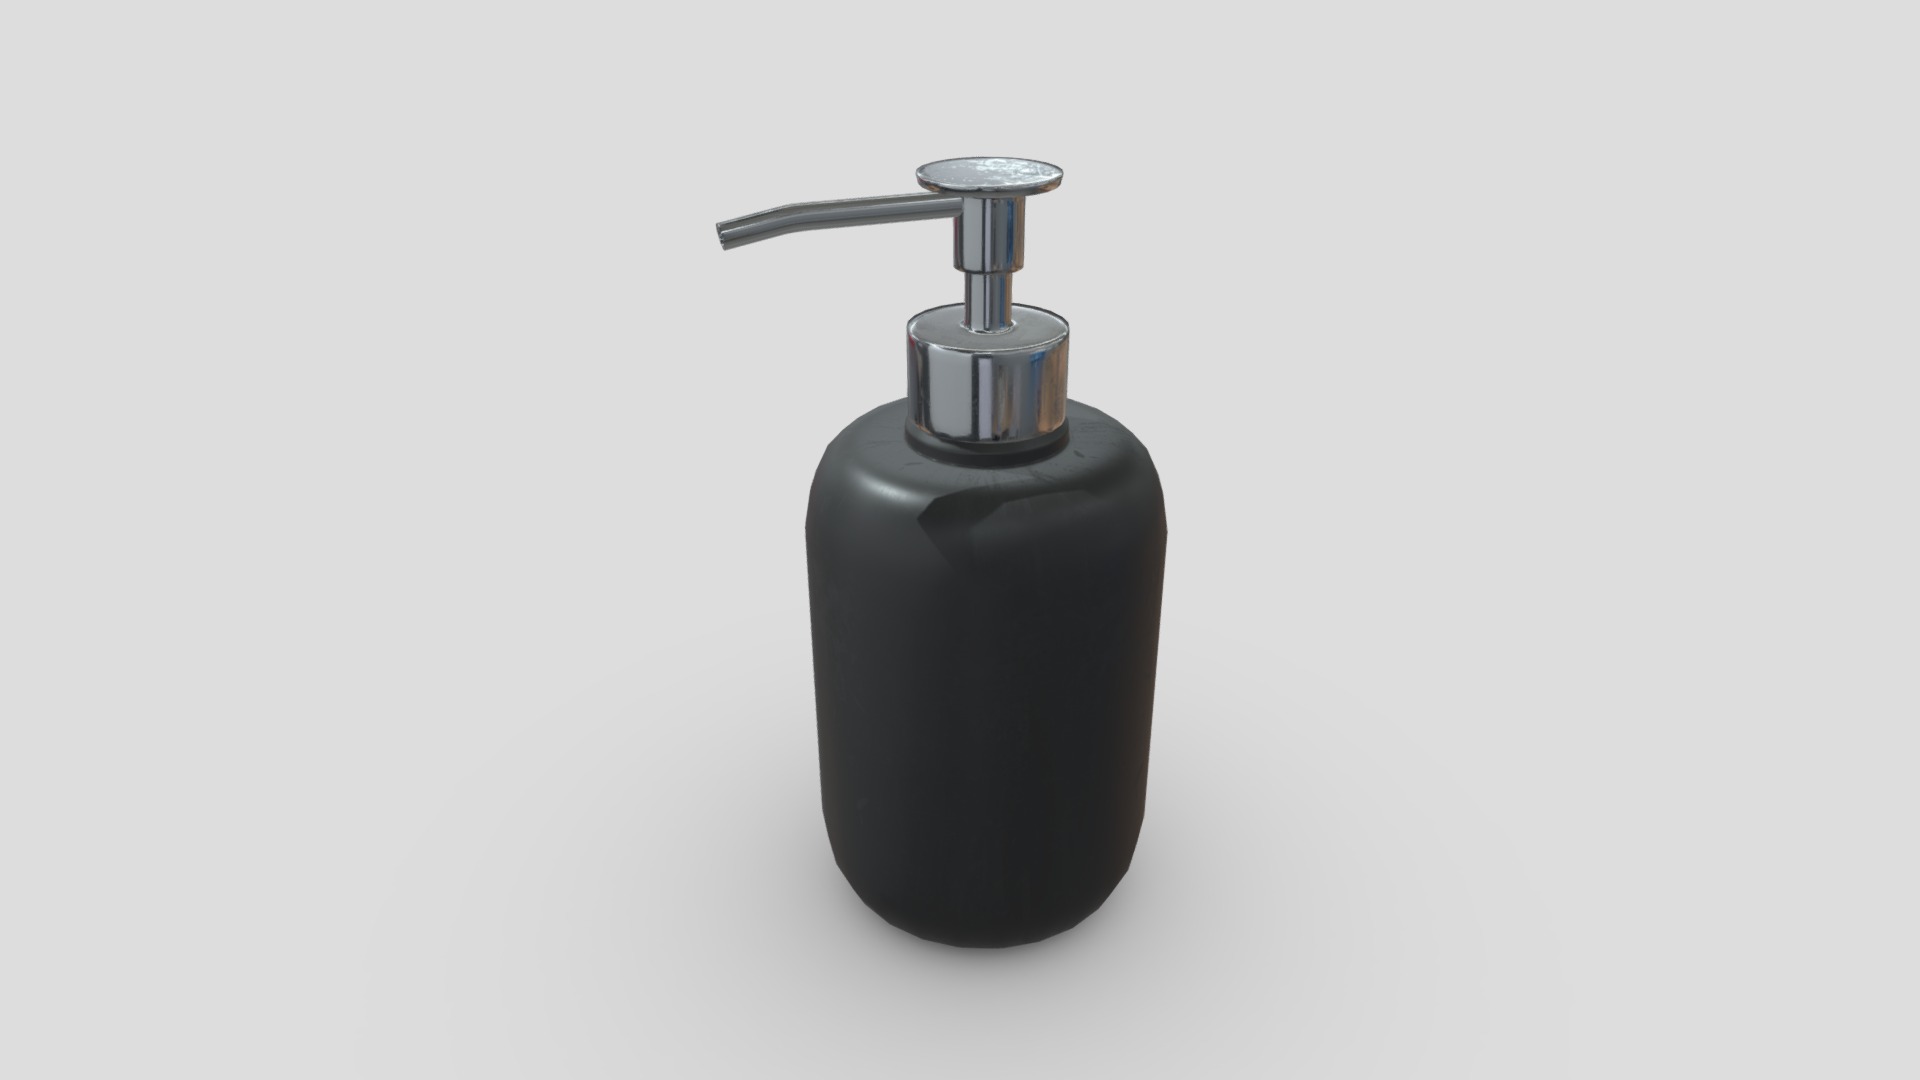 3D model Soap Dispenser 3 - This is a 3D model of the Soap Dispenser 3. The 3D model is about a black cylindrical object.